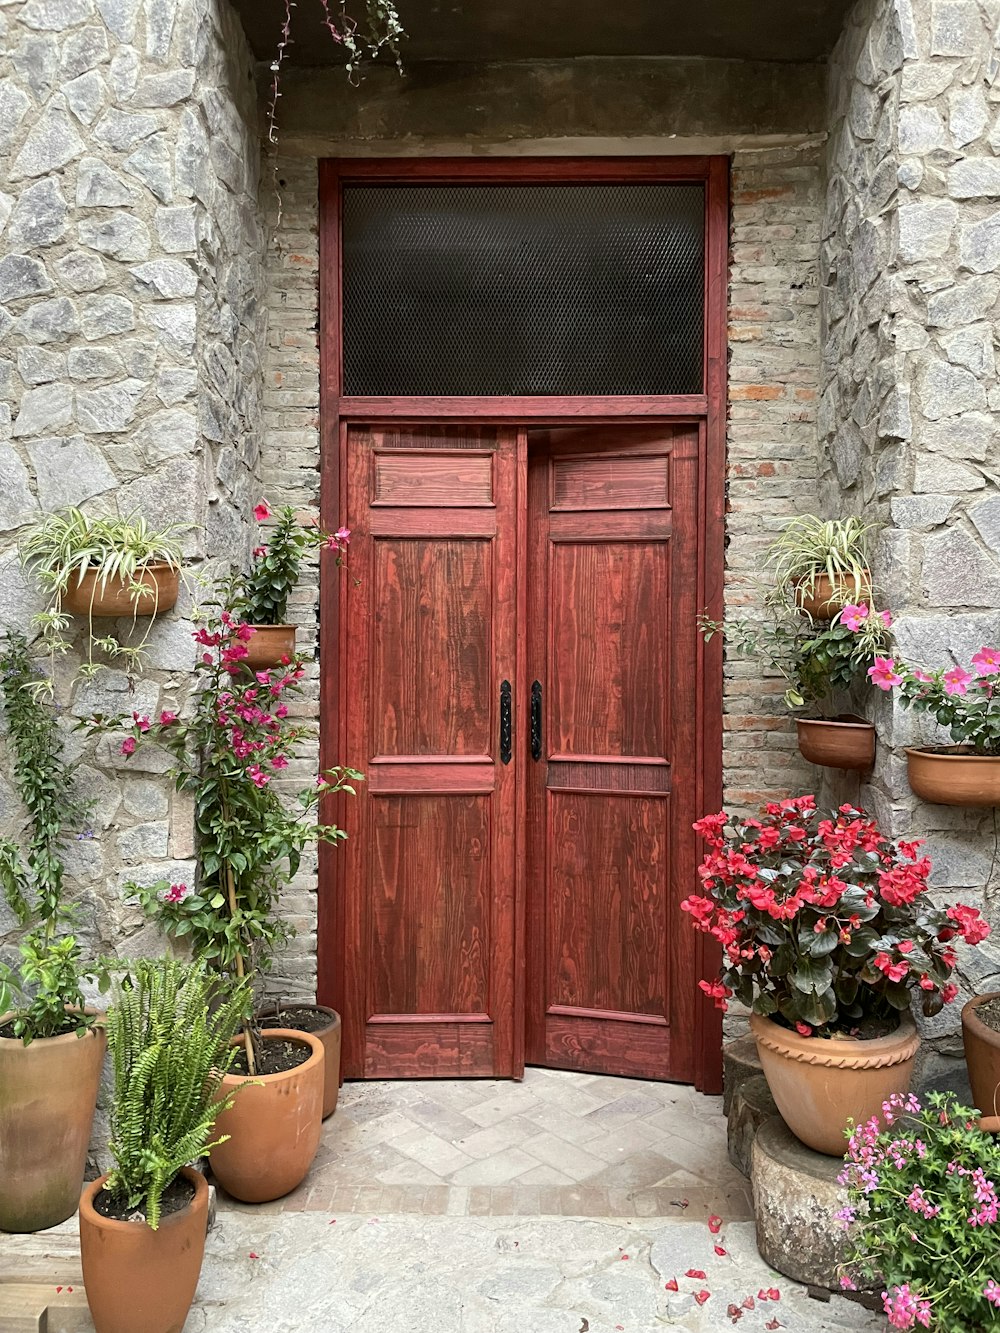 a red wooden door surrounded by potted plants